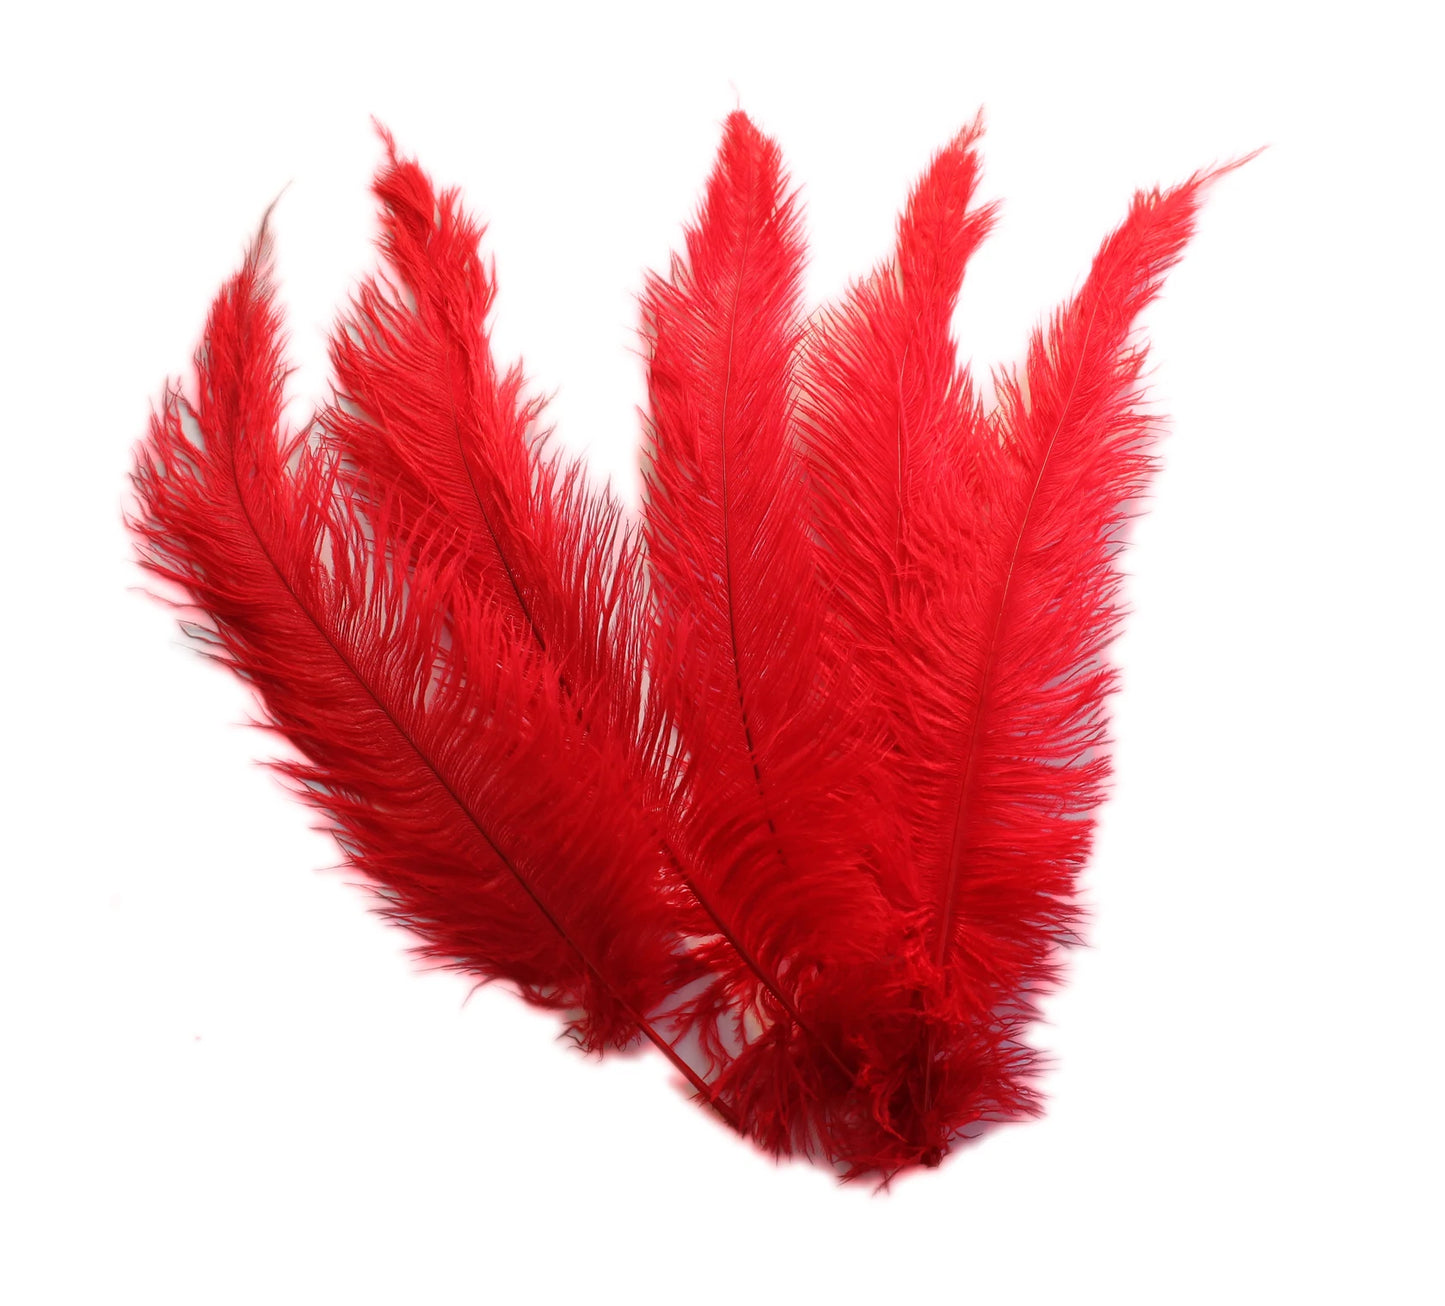 Ostrich Feather Spad Plumes 15-18" (Red) - Buy Ostrich Feathers